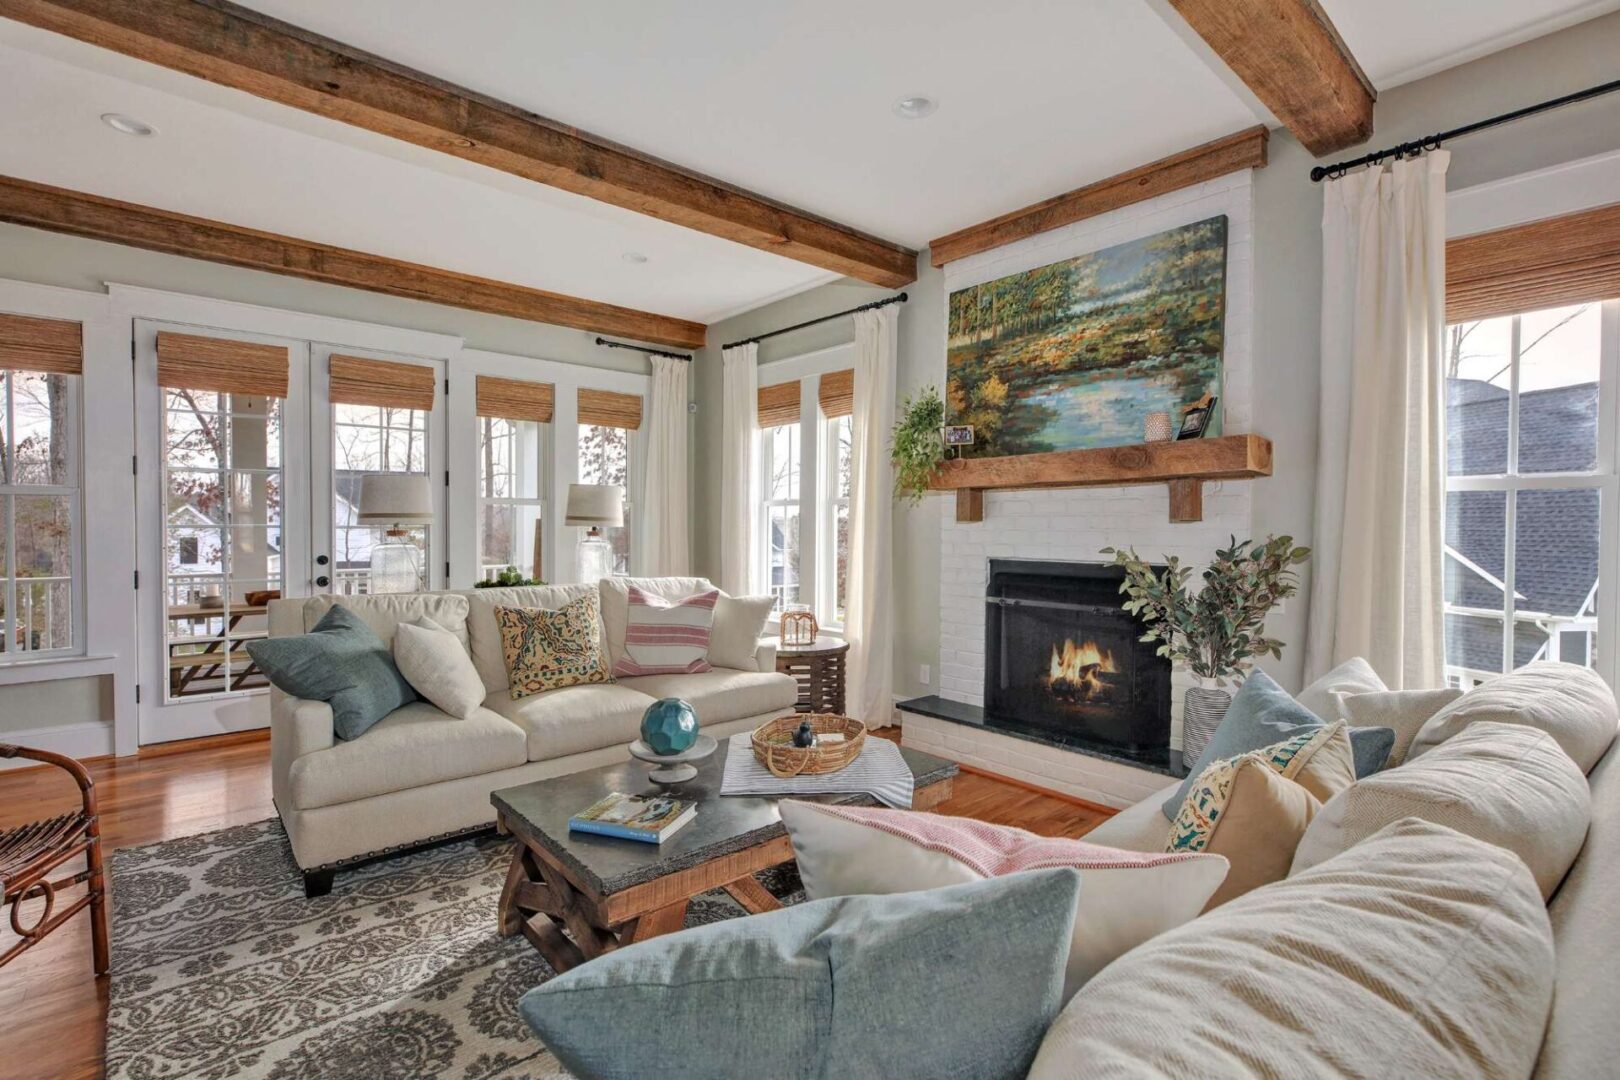 A living room with white furniture and wood beams.